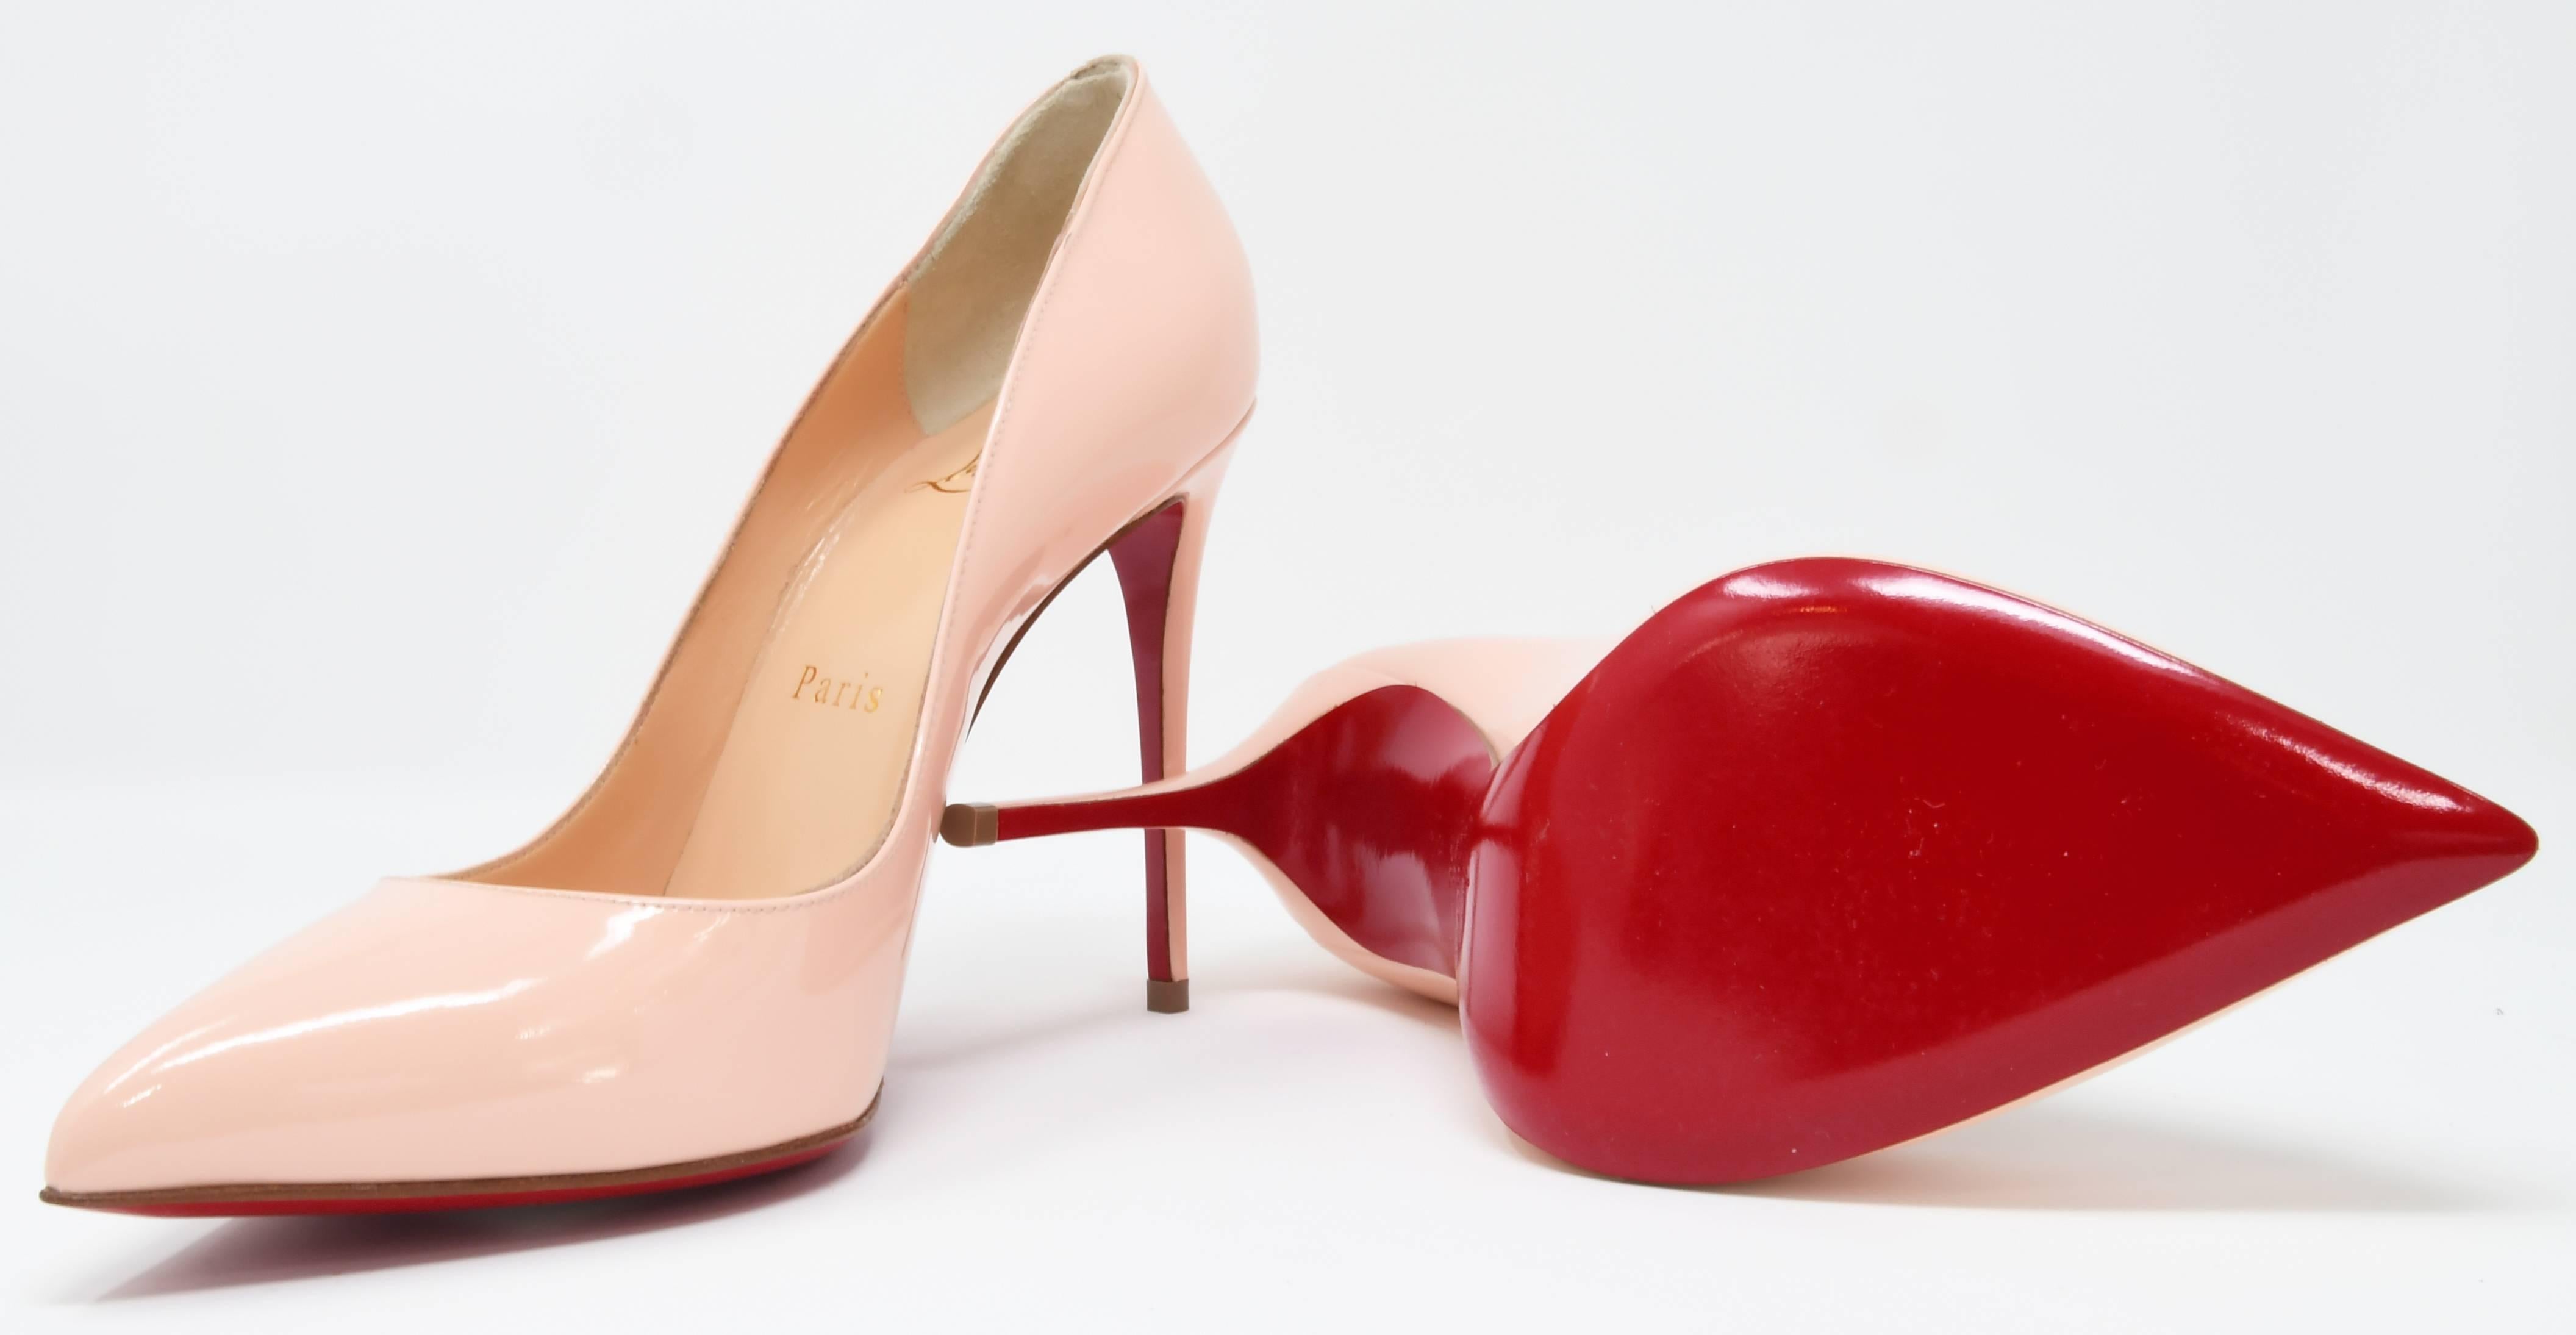 Beige Christian Louboutin Stiletto in Light Peach Patent Leather, Size 36 For Sale